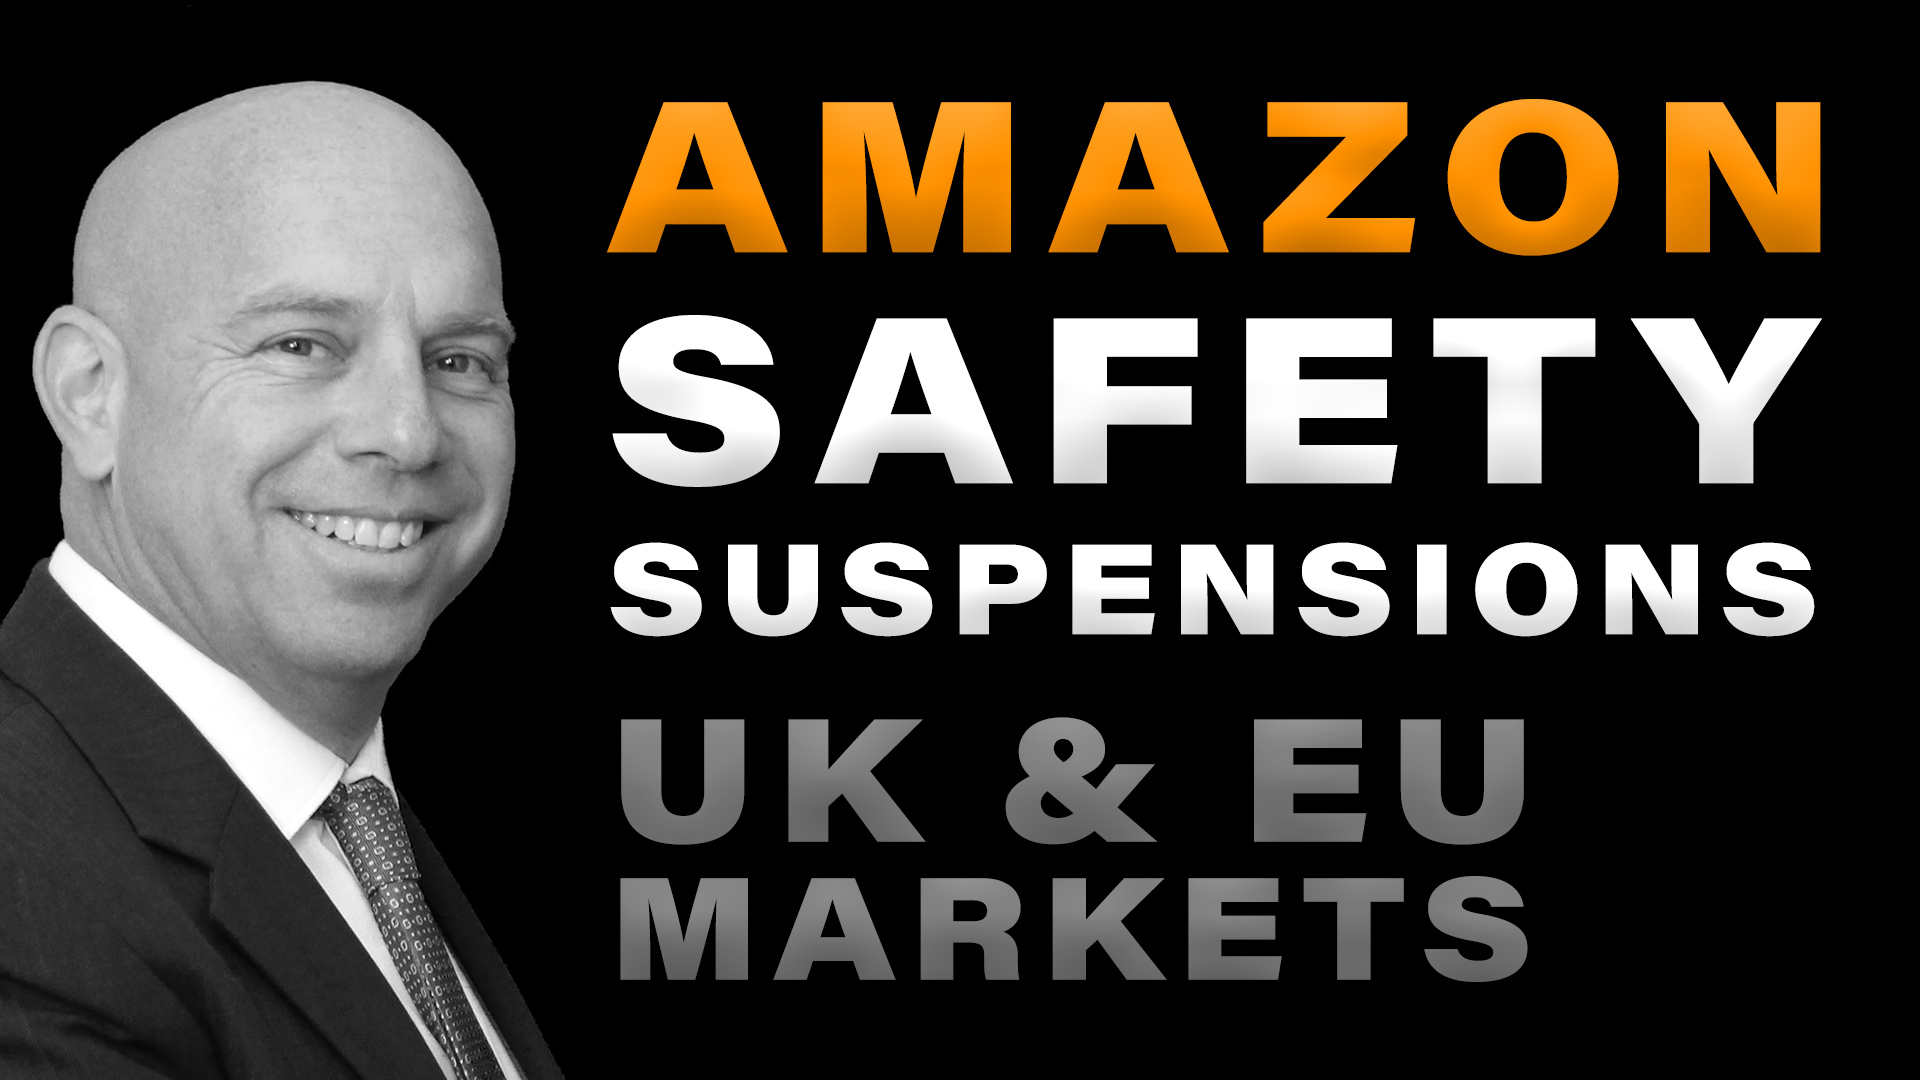 Amazon Seller Safety Suspensions in UK & EU